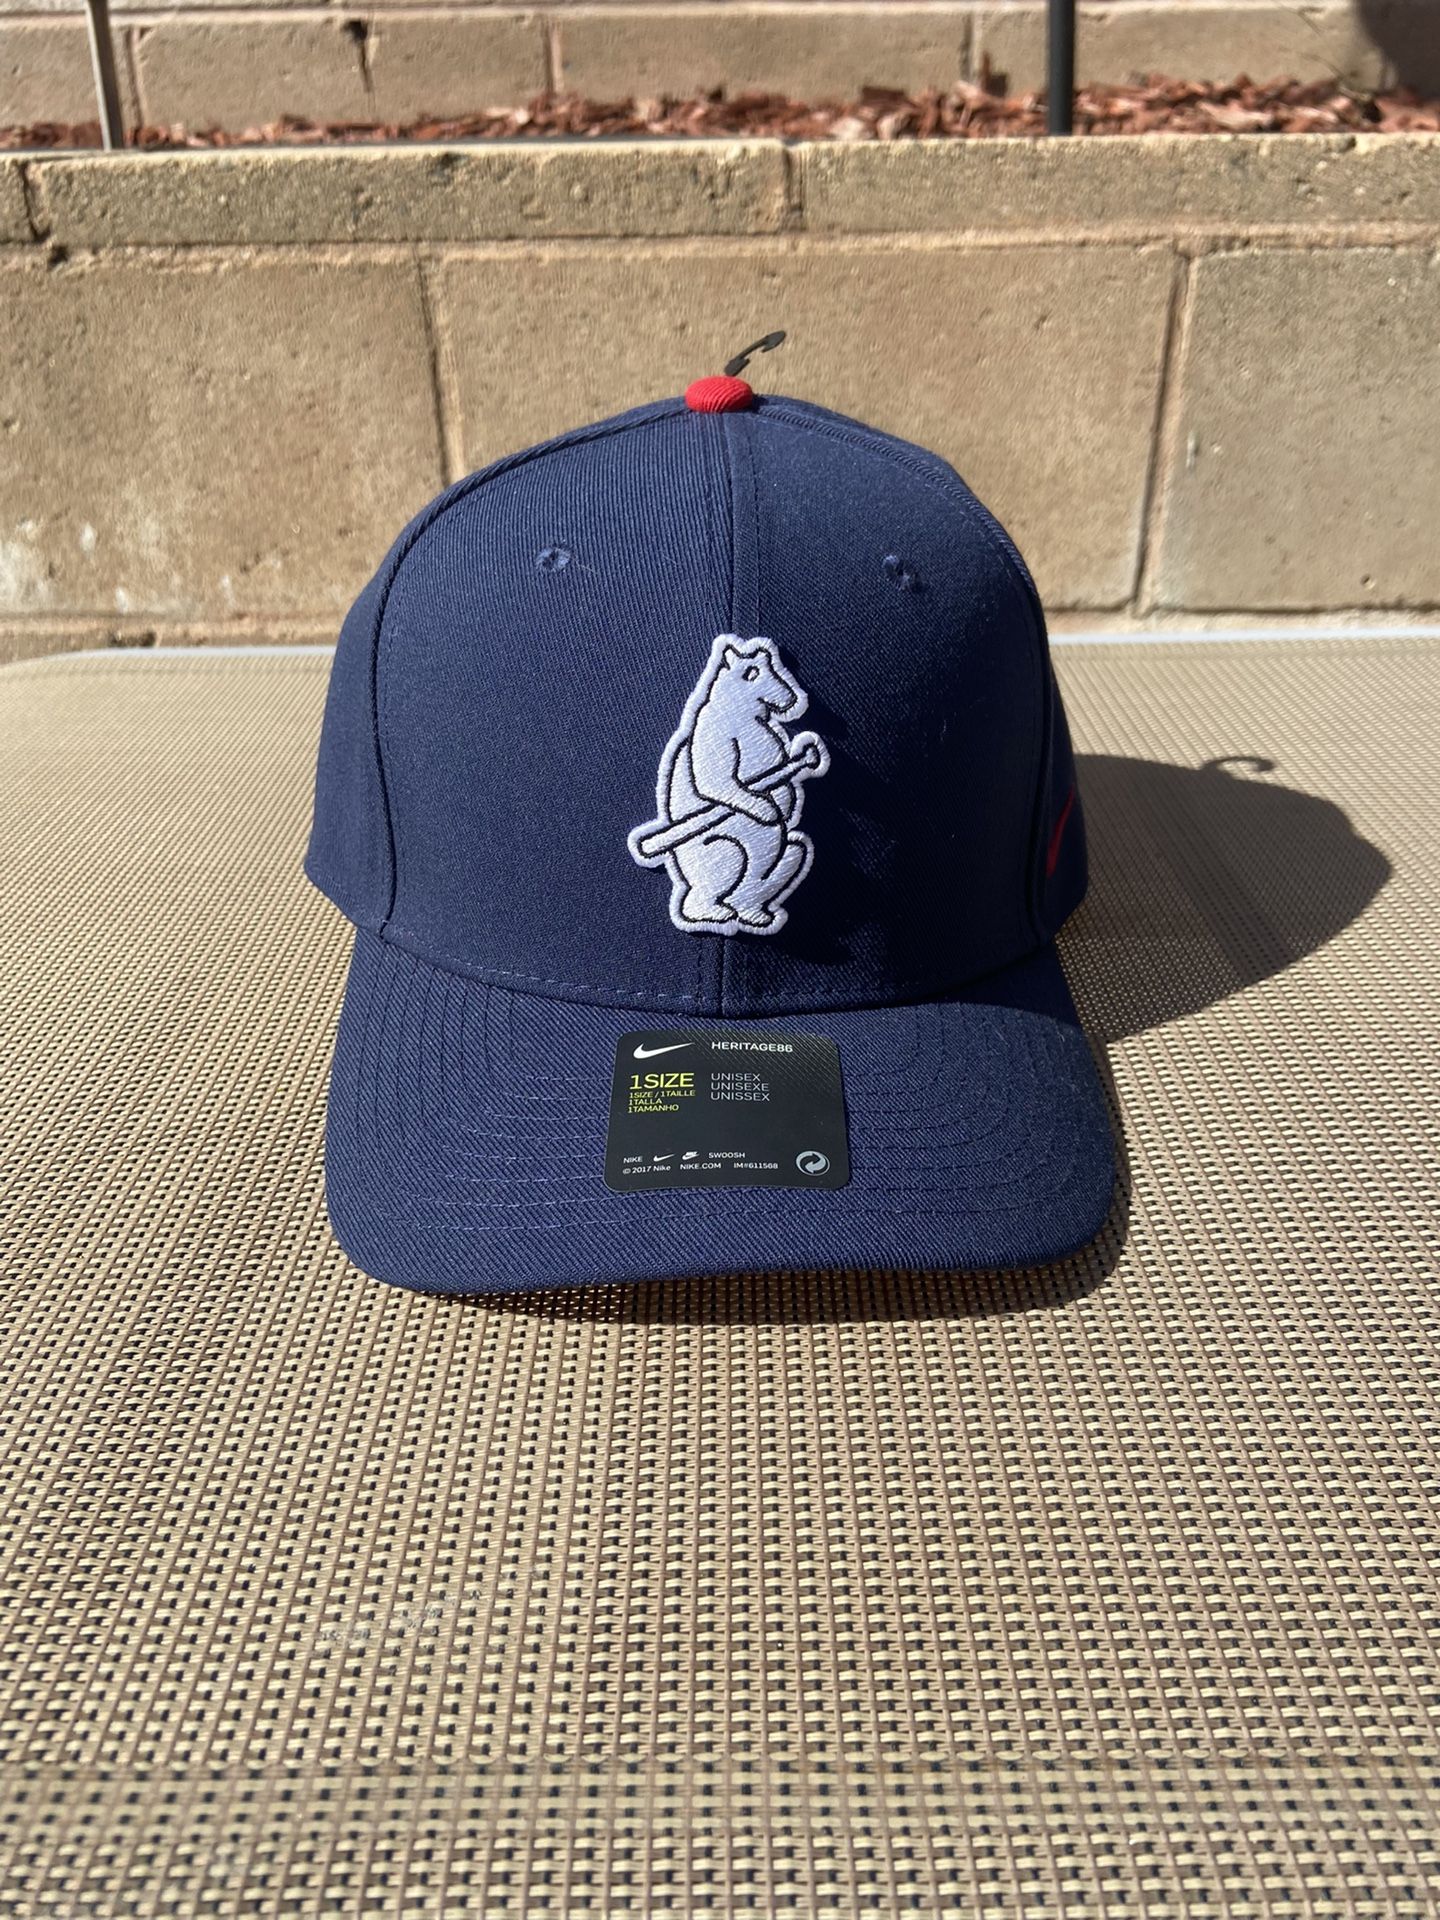 Nike Chicago Cubs Hat for Sale in La Mesa, CA - OfferUp